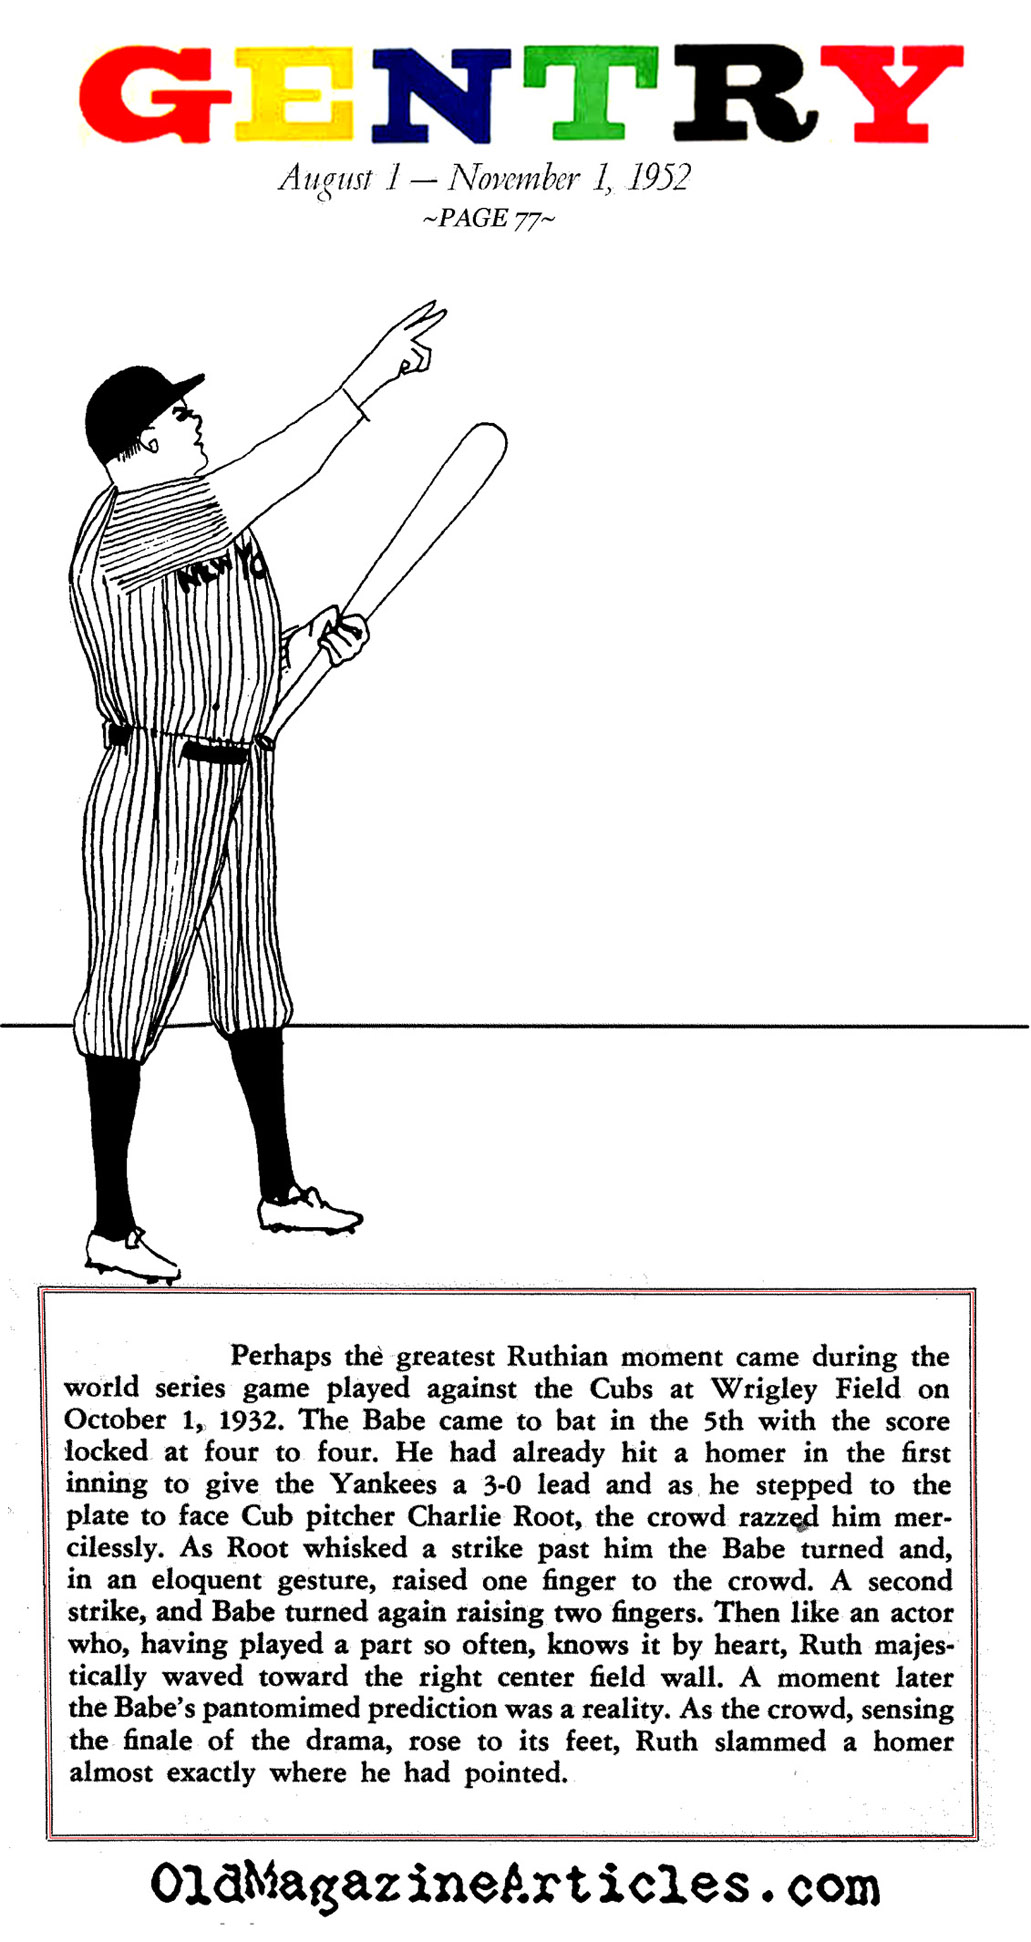 The Showmanship of Babe Ruth (Gentry Magazine, 1952)